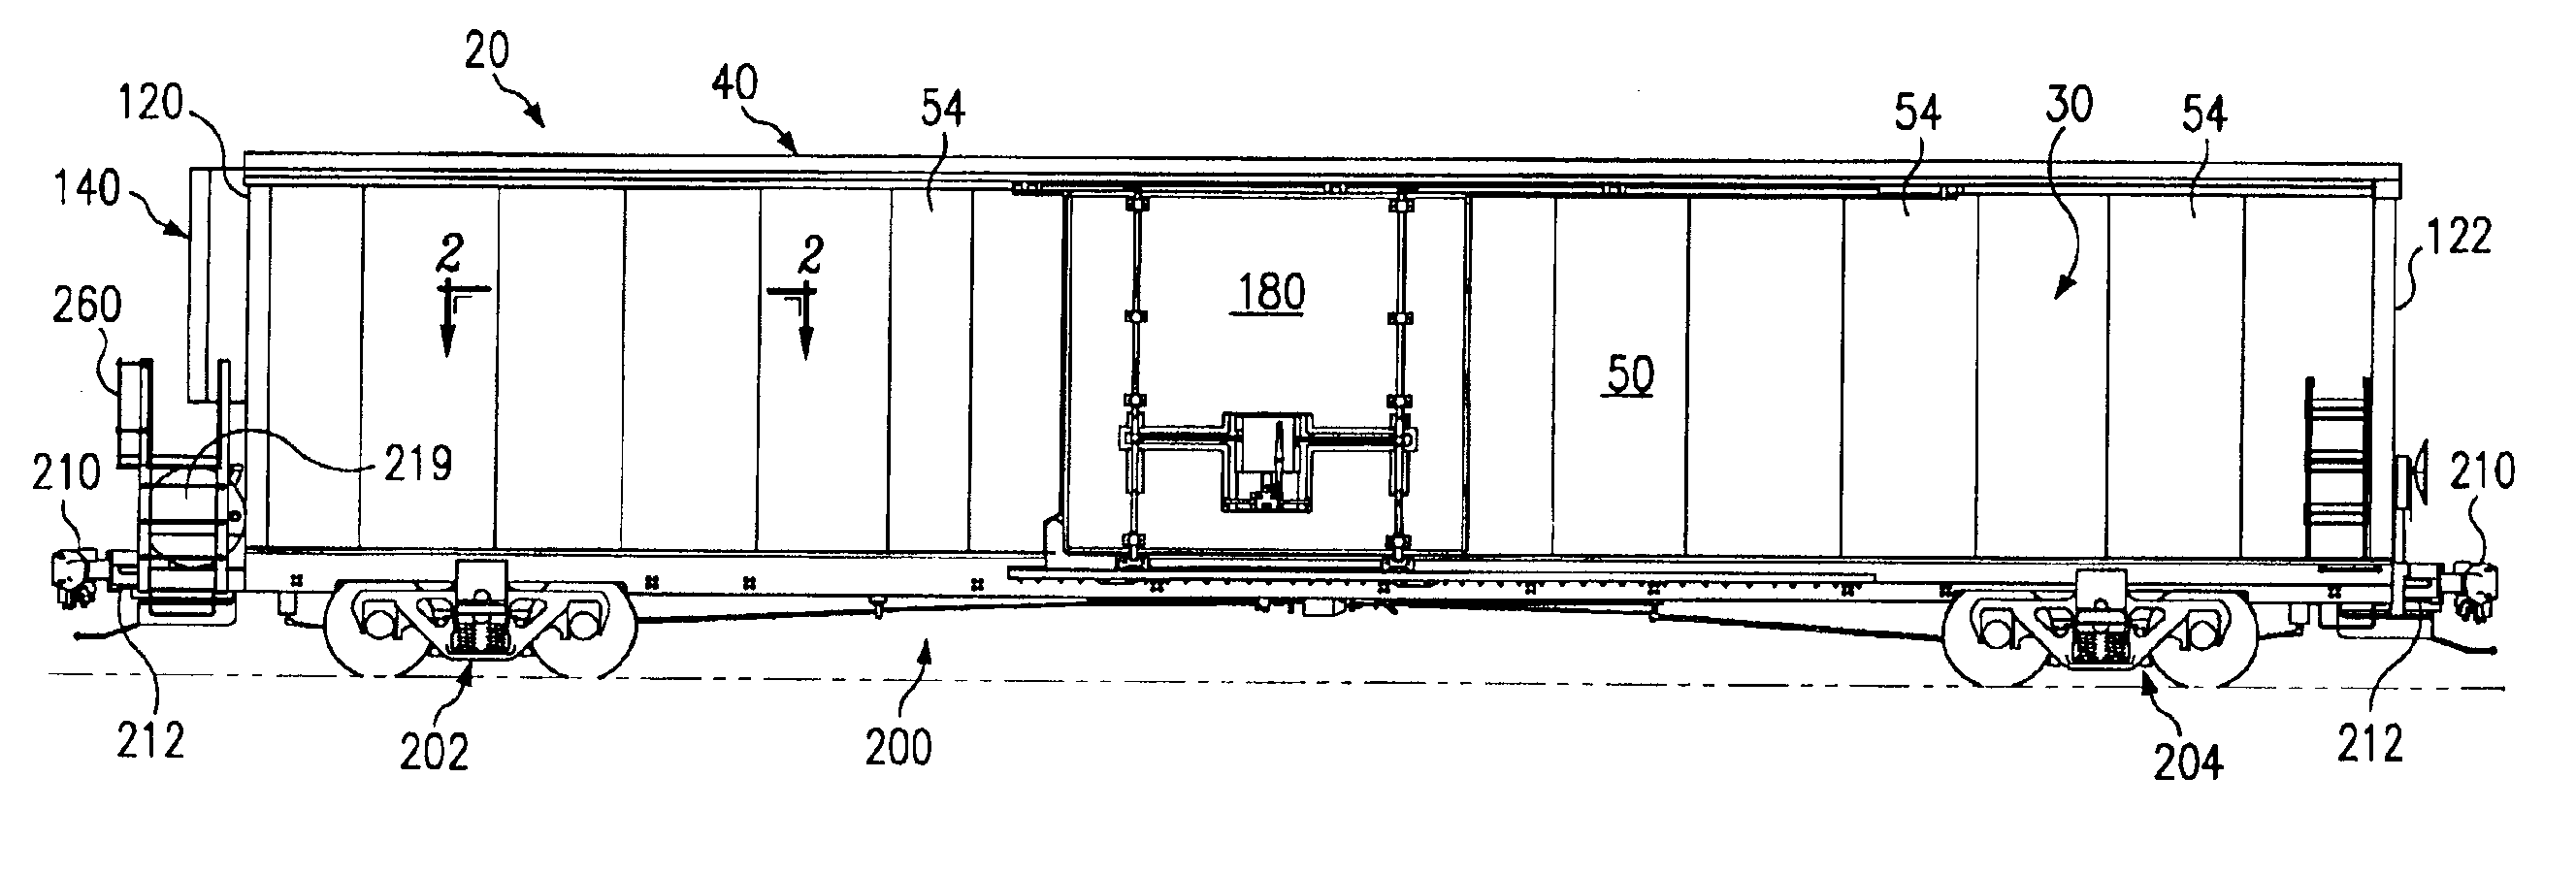 Manufacturing method of assembling temperature controlled railway car